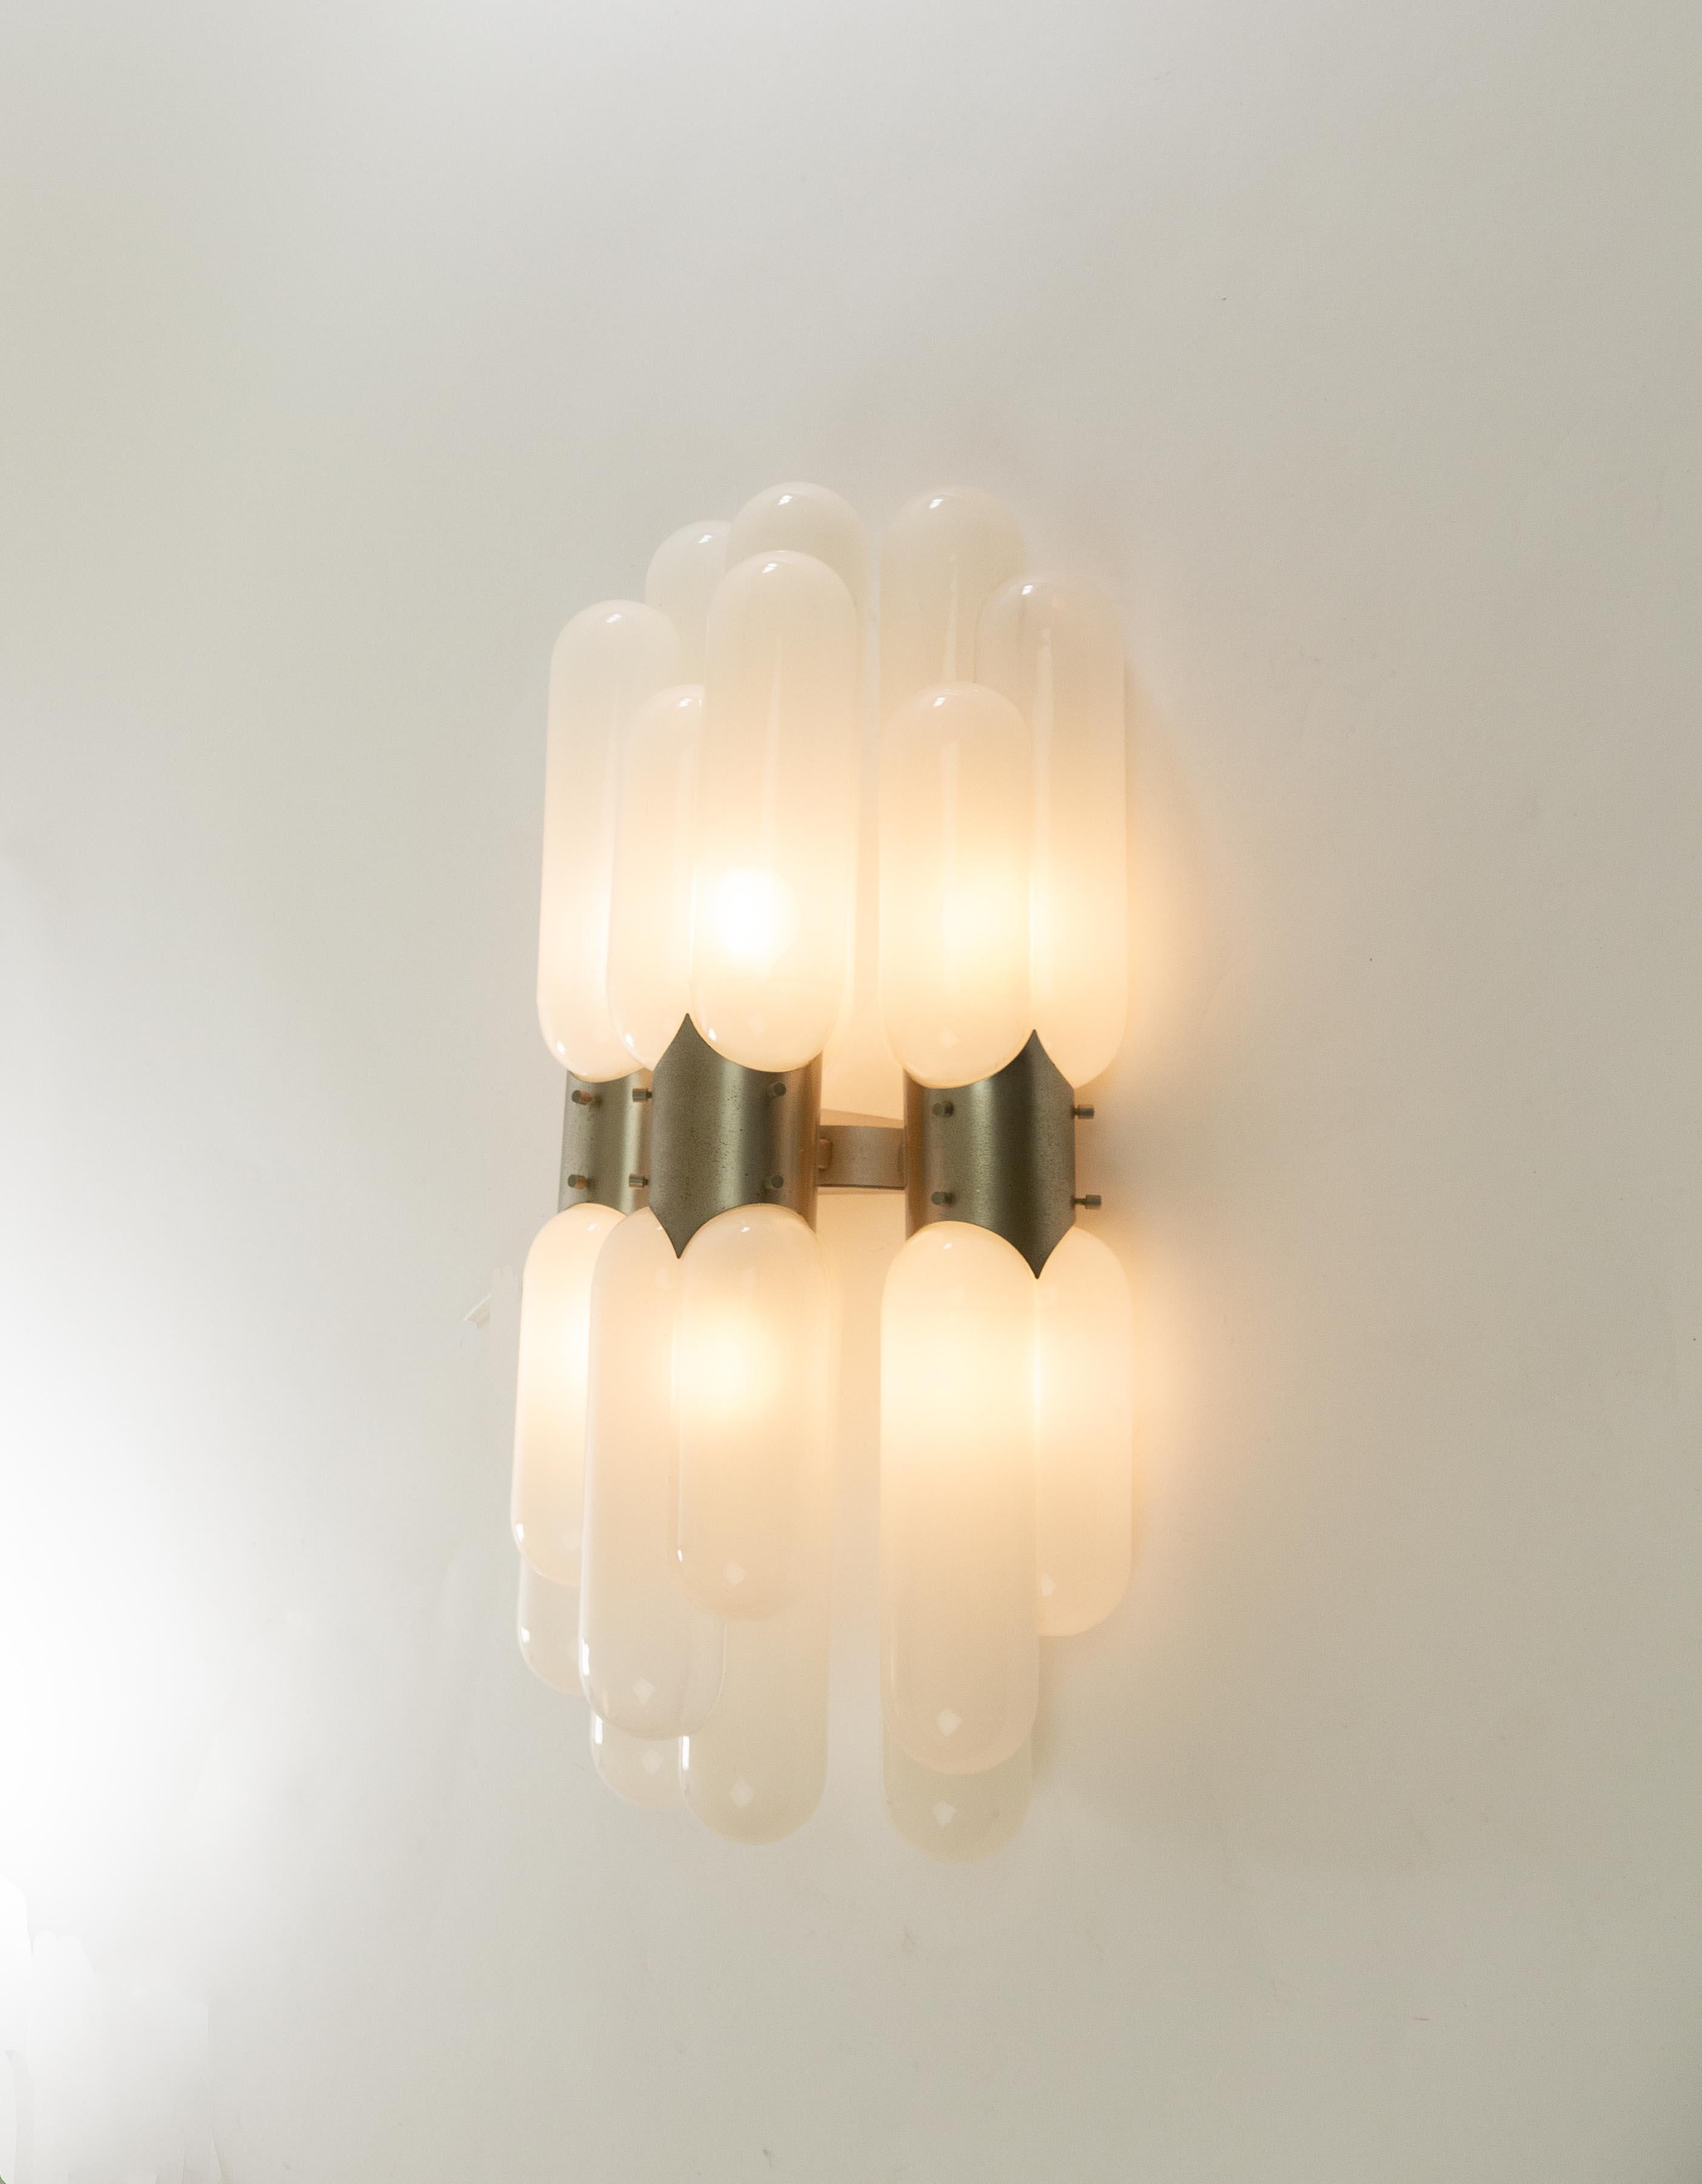 Wall lamp made from hand blown Murano glass, most probably designed and produced in the 1970s.

This impressive piece with sculptural quality consists of six identical glass tubular elements, each consisting of three parts of different sizes. The